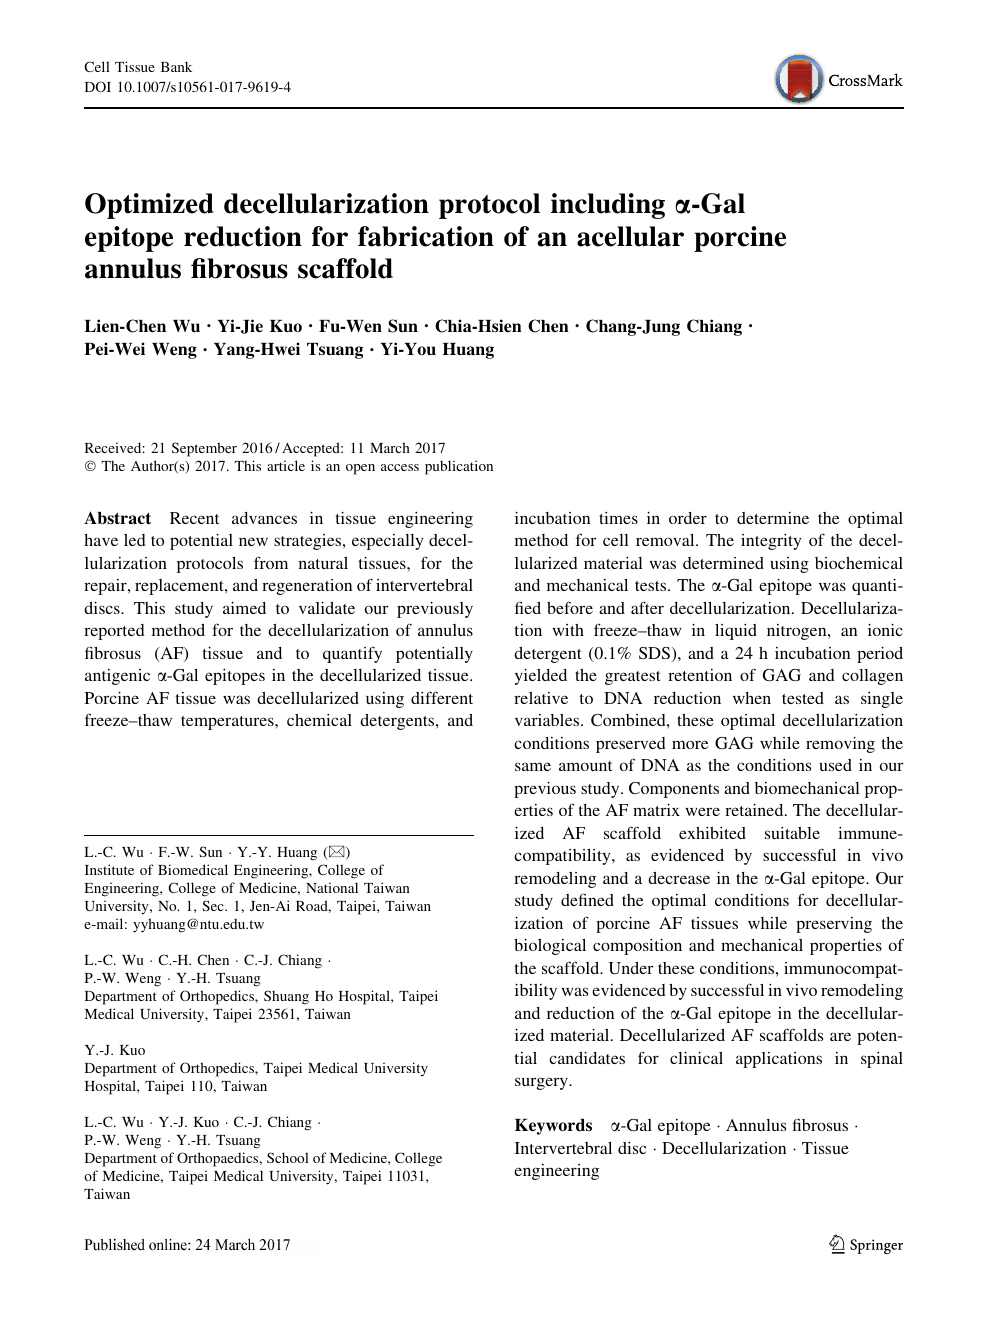 Optimized Decellularization Protocol Including A Gal Epitope Reduction For Fabrication Of An Acellular Porcine Annulus Fibrosus Scaffold Topic Of Research Paper In Medical Engineering Download Scholarly Article Pdf And Read For Free